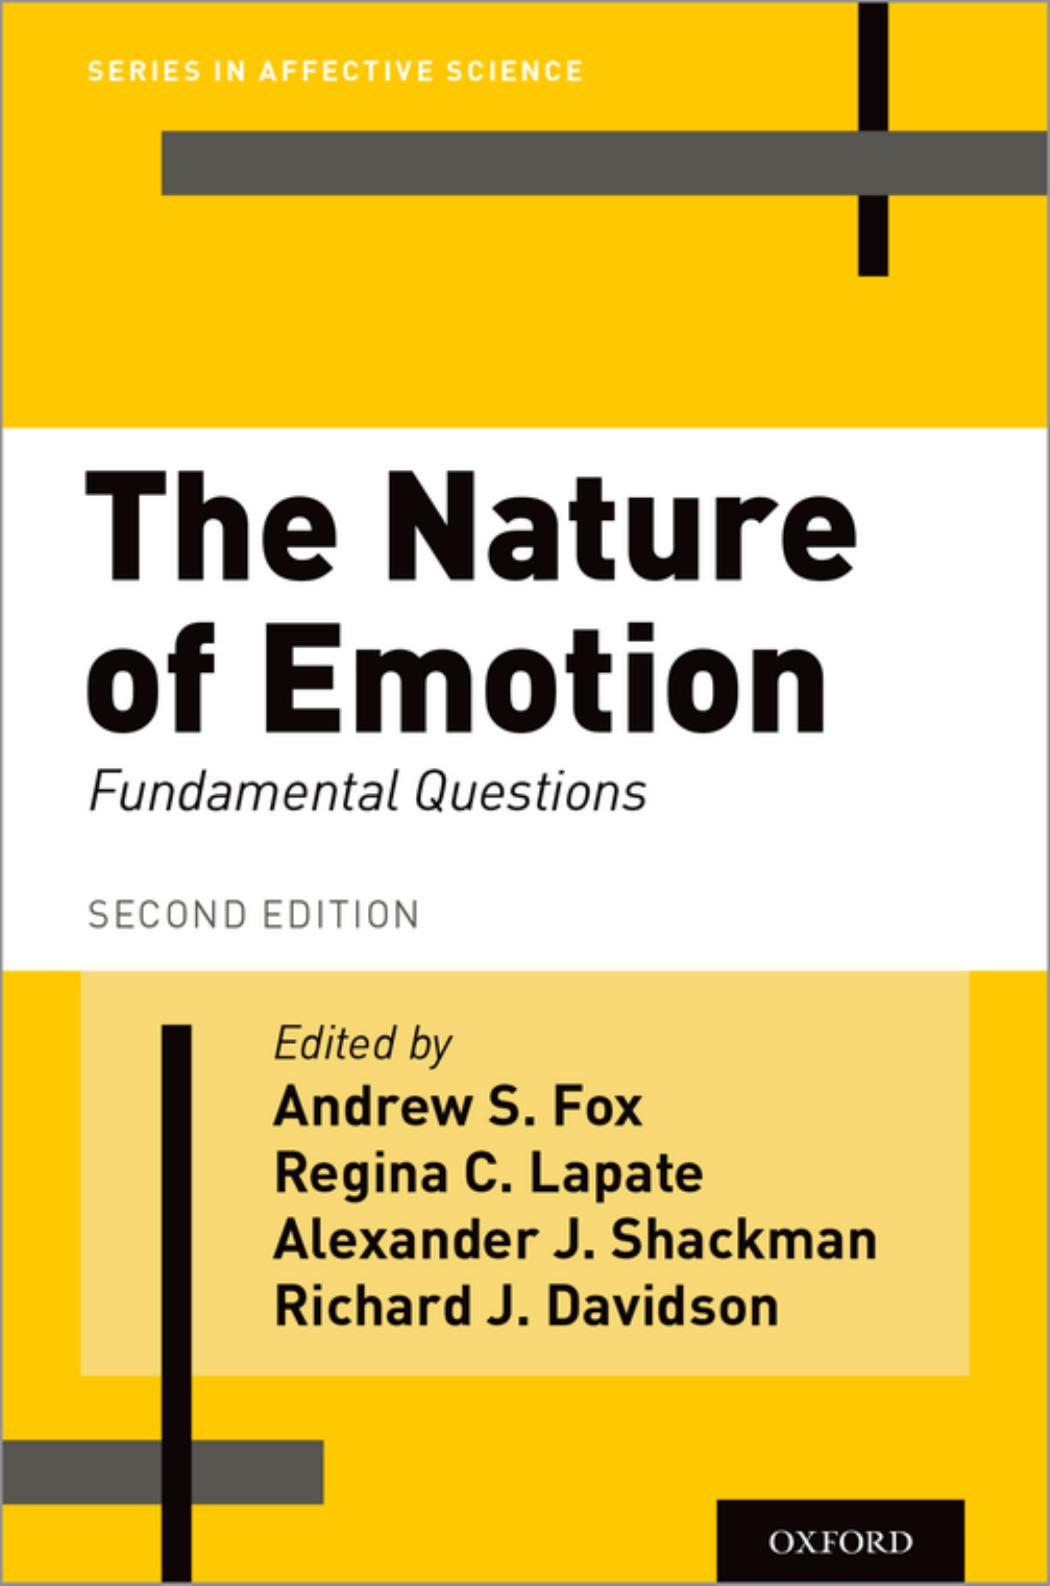 The Nature of Emotion: Fundamental Questions